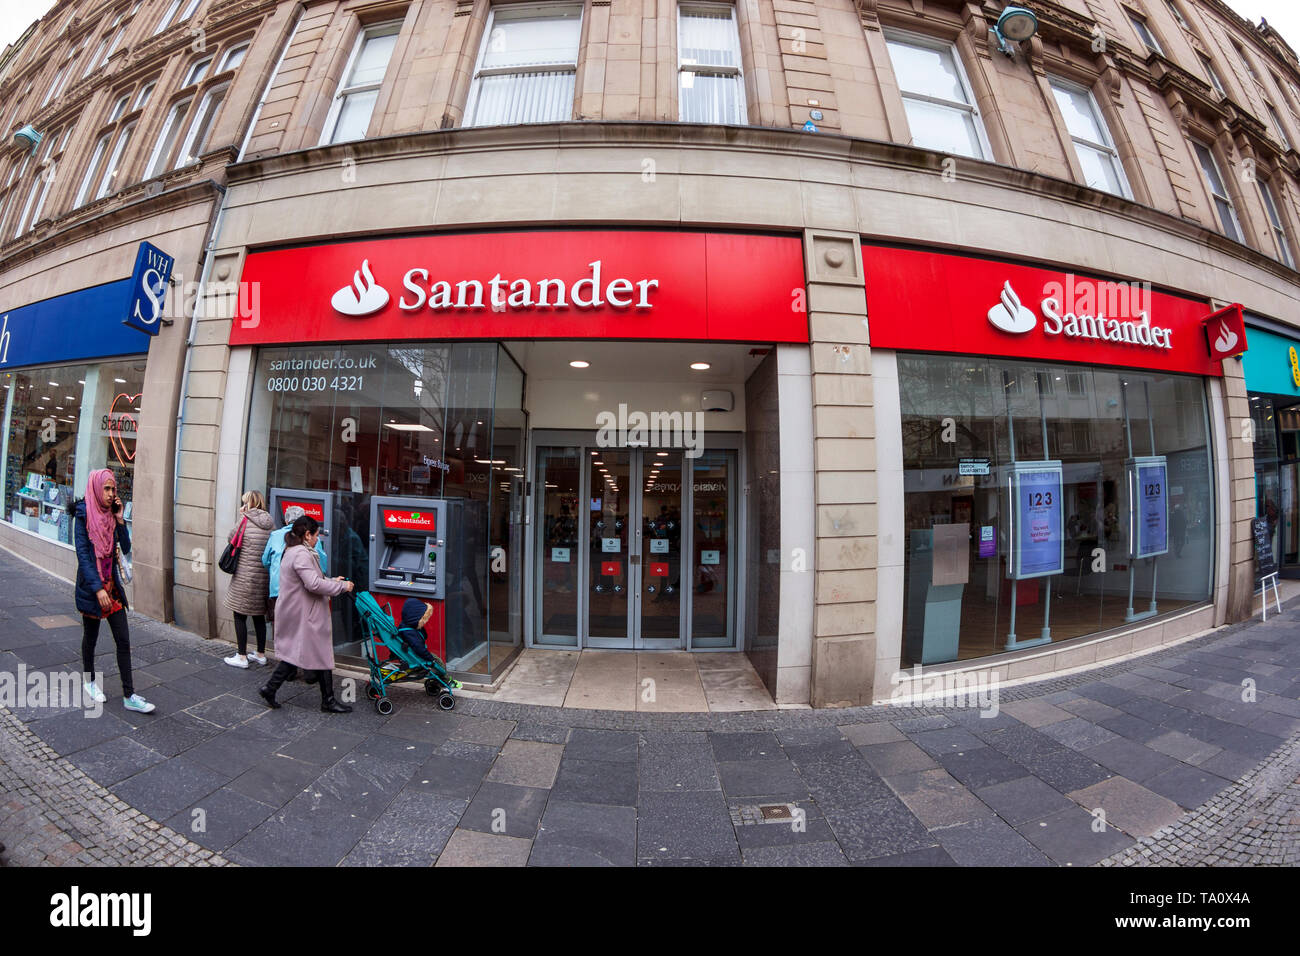 Santander Uk High Resolution Stock Photography And Images Alamy